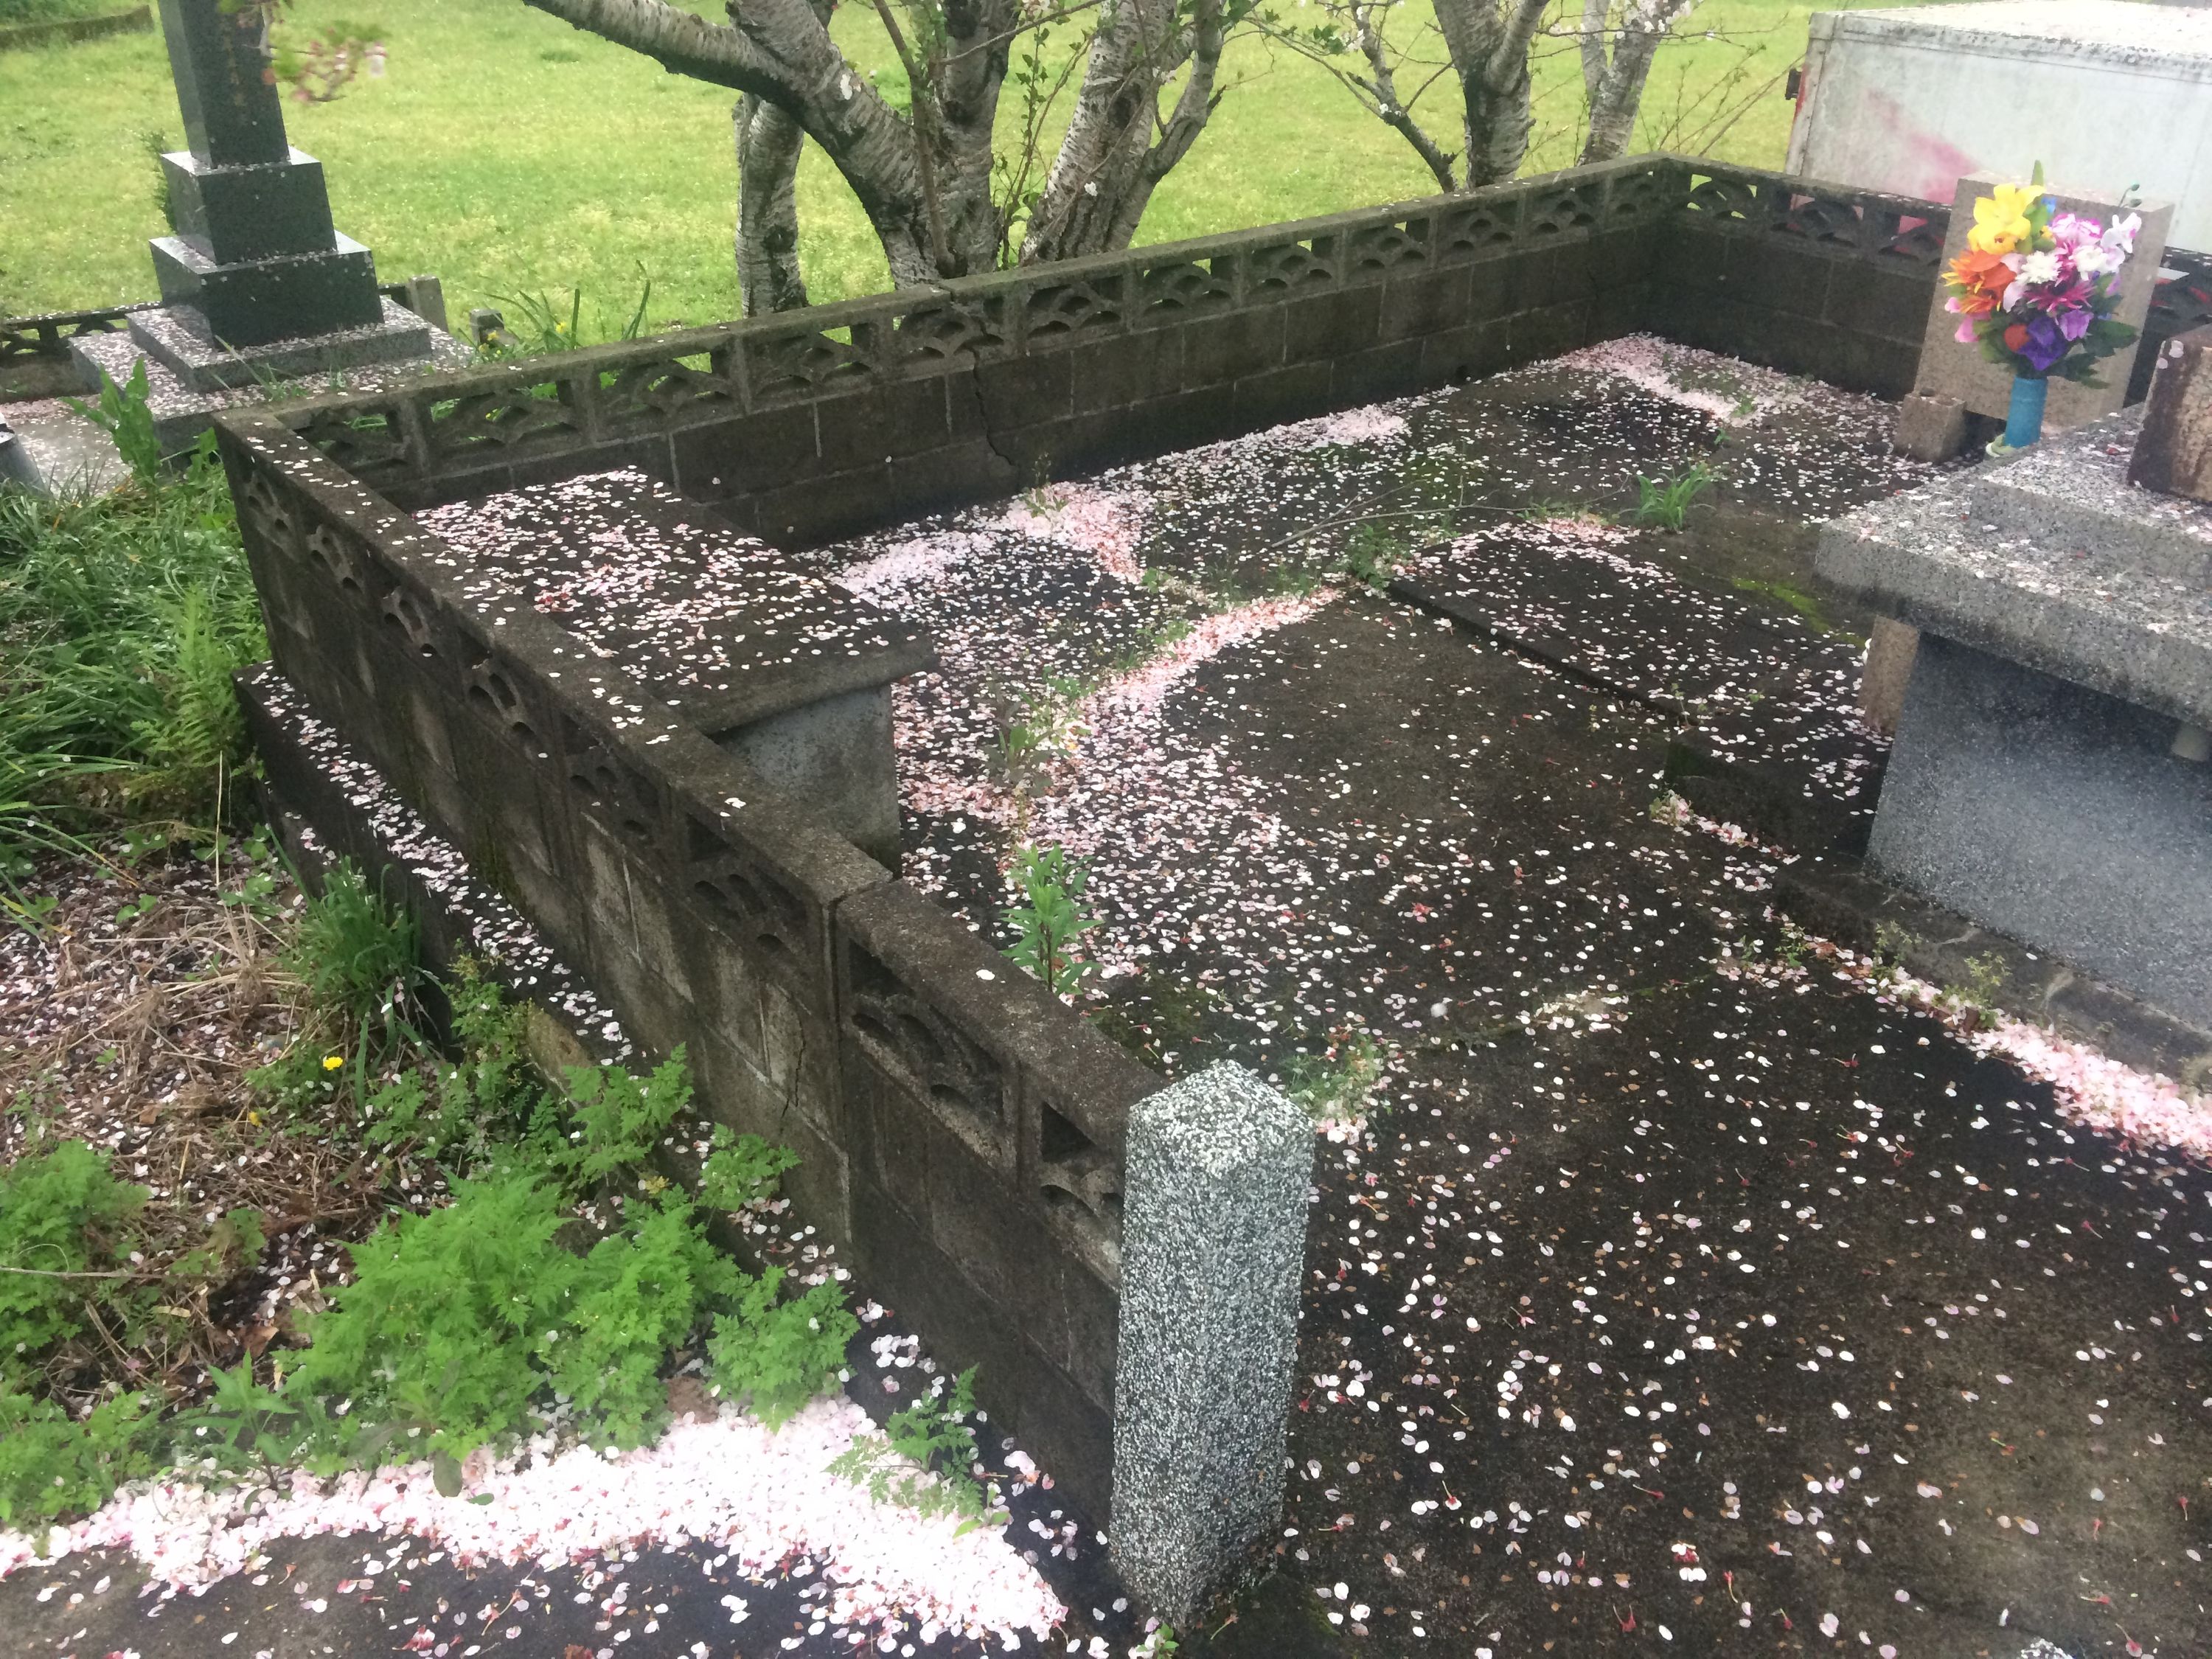 A large graves covered in fallen cherry blossoms.